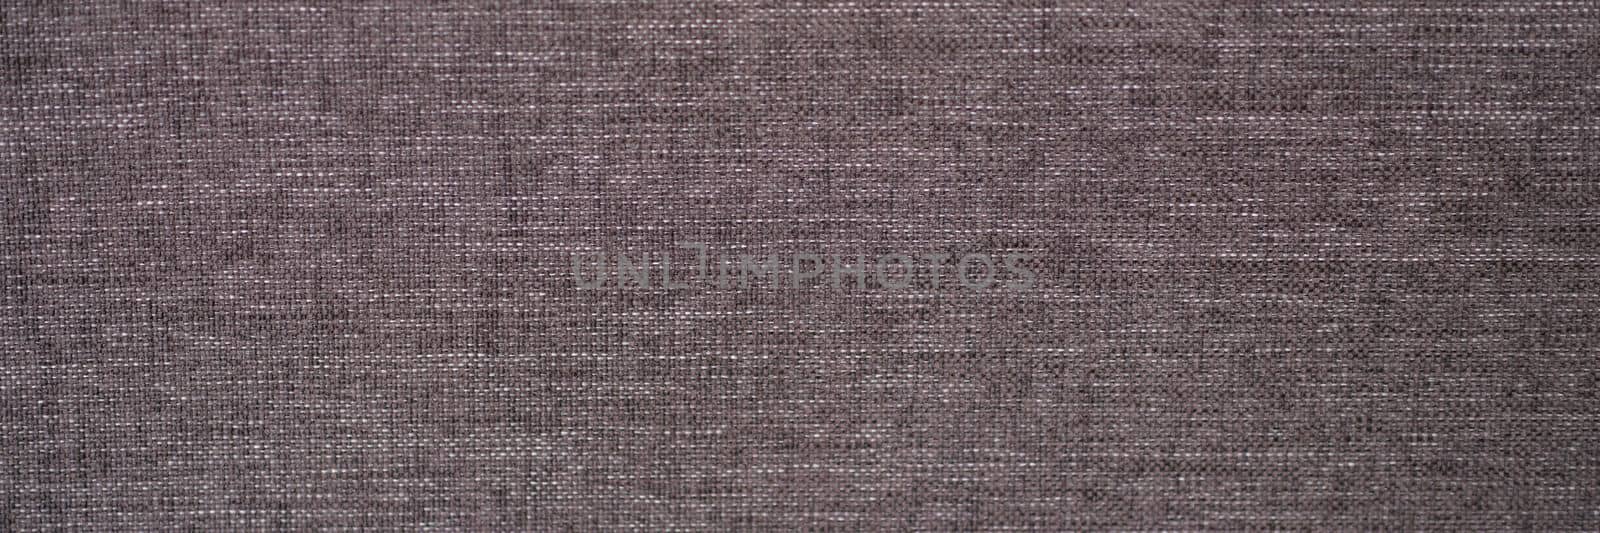 Dark gray brown fabric textile background. Quality linen fabric concept